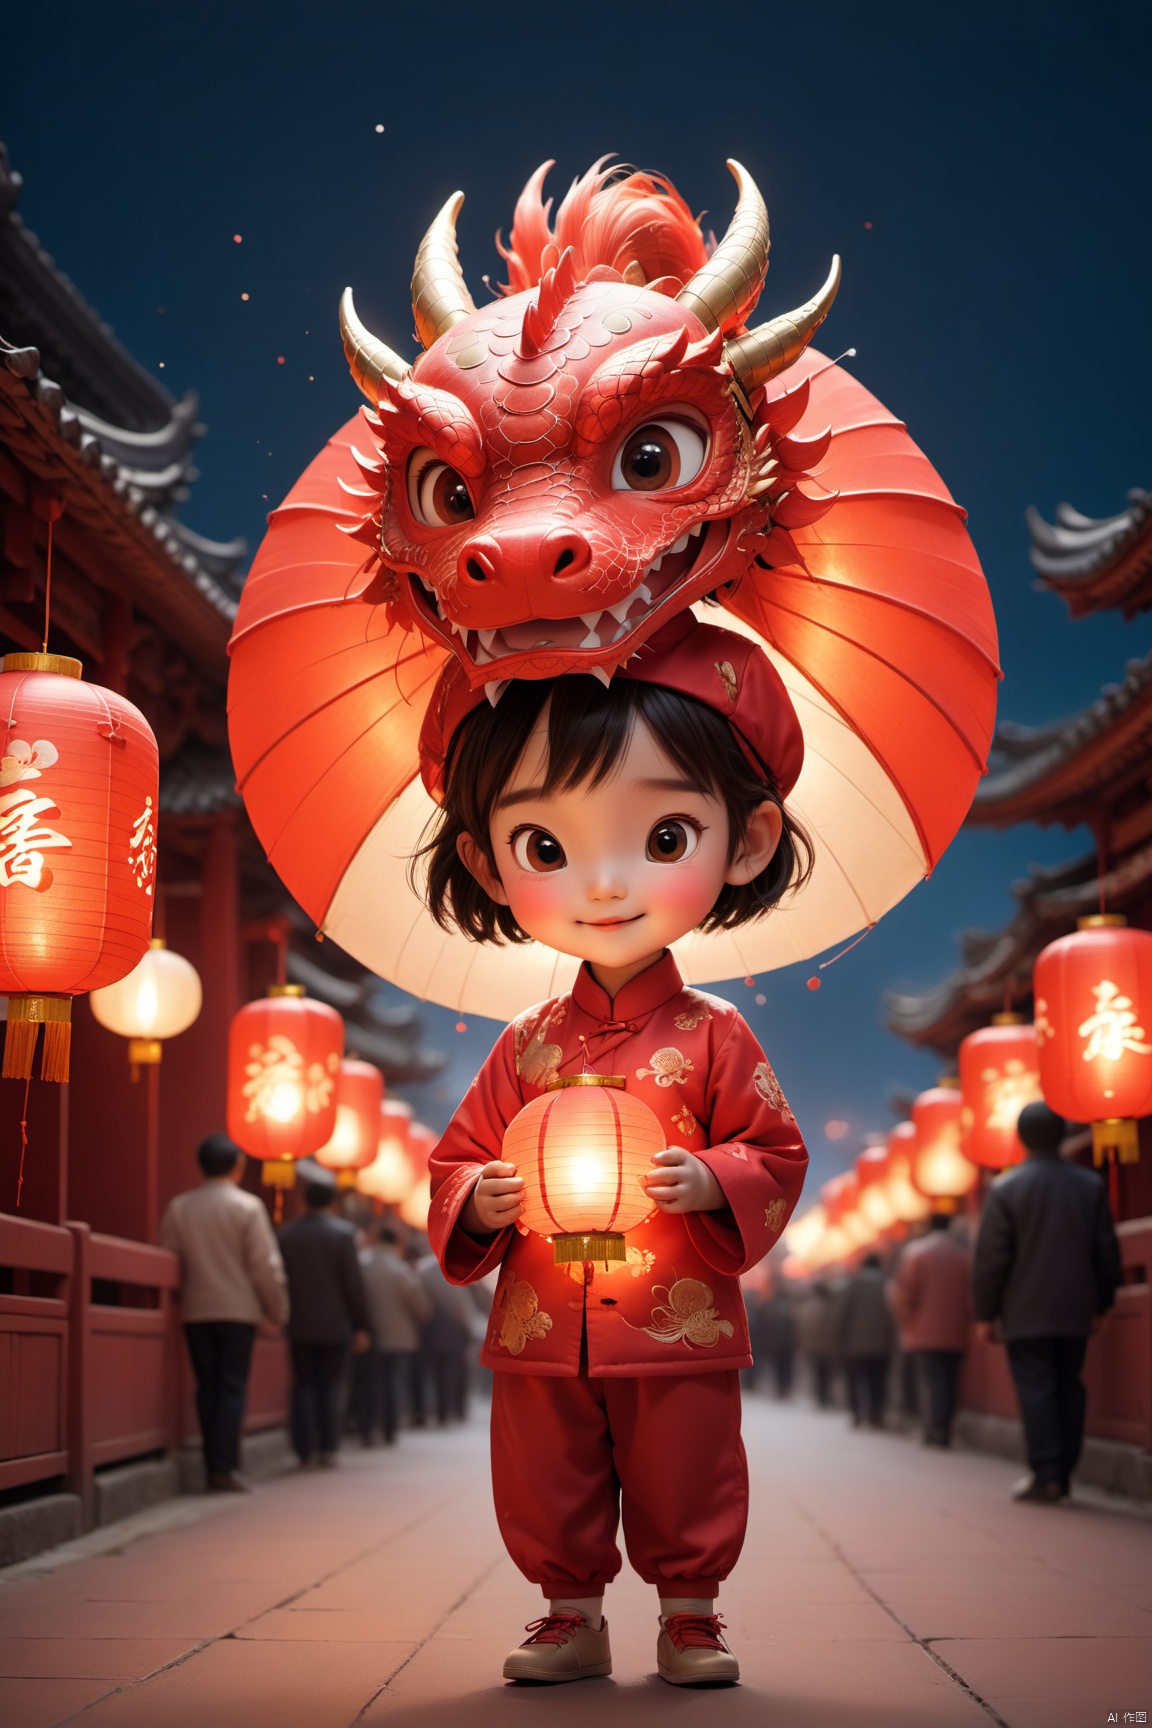  Spring Festival, the red theme, the atmosphere of the spring festival, the little girl wearing a dragon hat, sitting on a red Chinese dragon, the little girl in the blessing, fireworks in the night sky, the night sky dyed colorful. Red Lanterns hung on either side of the window, a festive atmosphere. The bustling crowds on the streets, full of excitement and joy and excitement, celebrate the festival. High-definition artwork, New Year&#039;s Eve, fireworks in the night sky, Red Lanterns, busy streets, celebrations